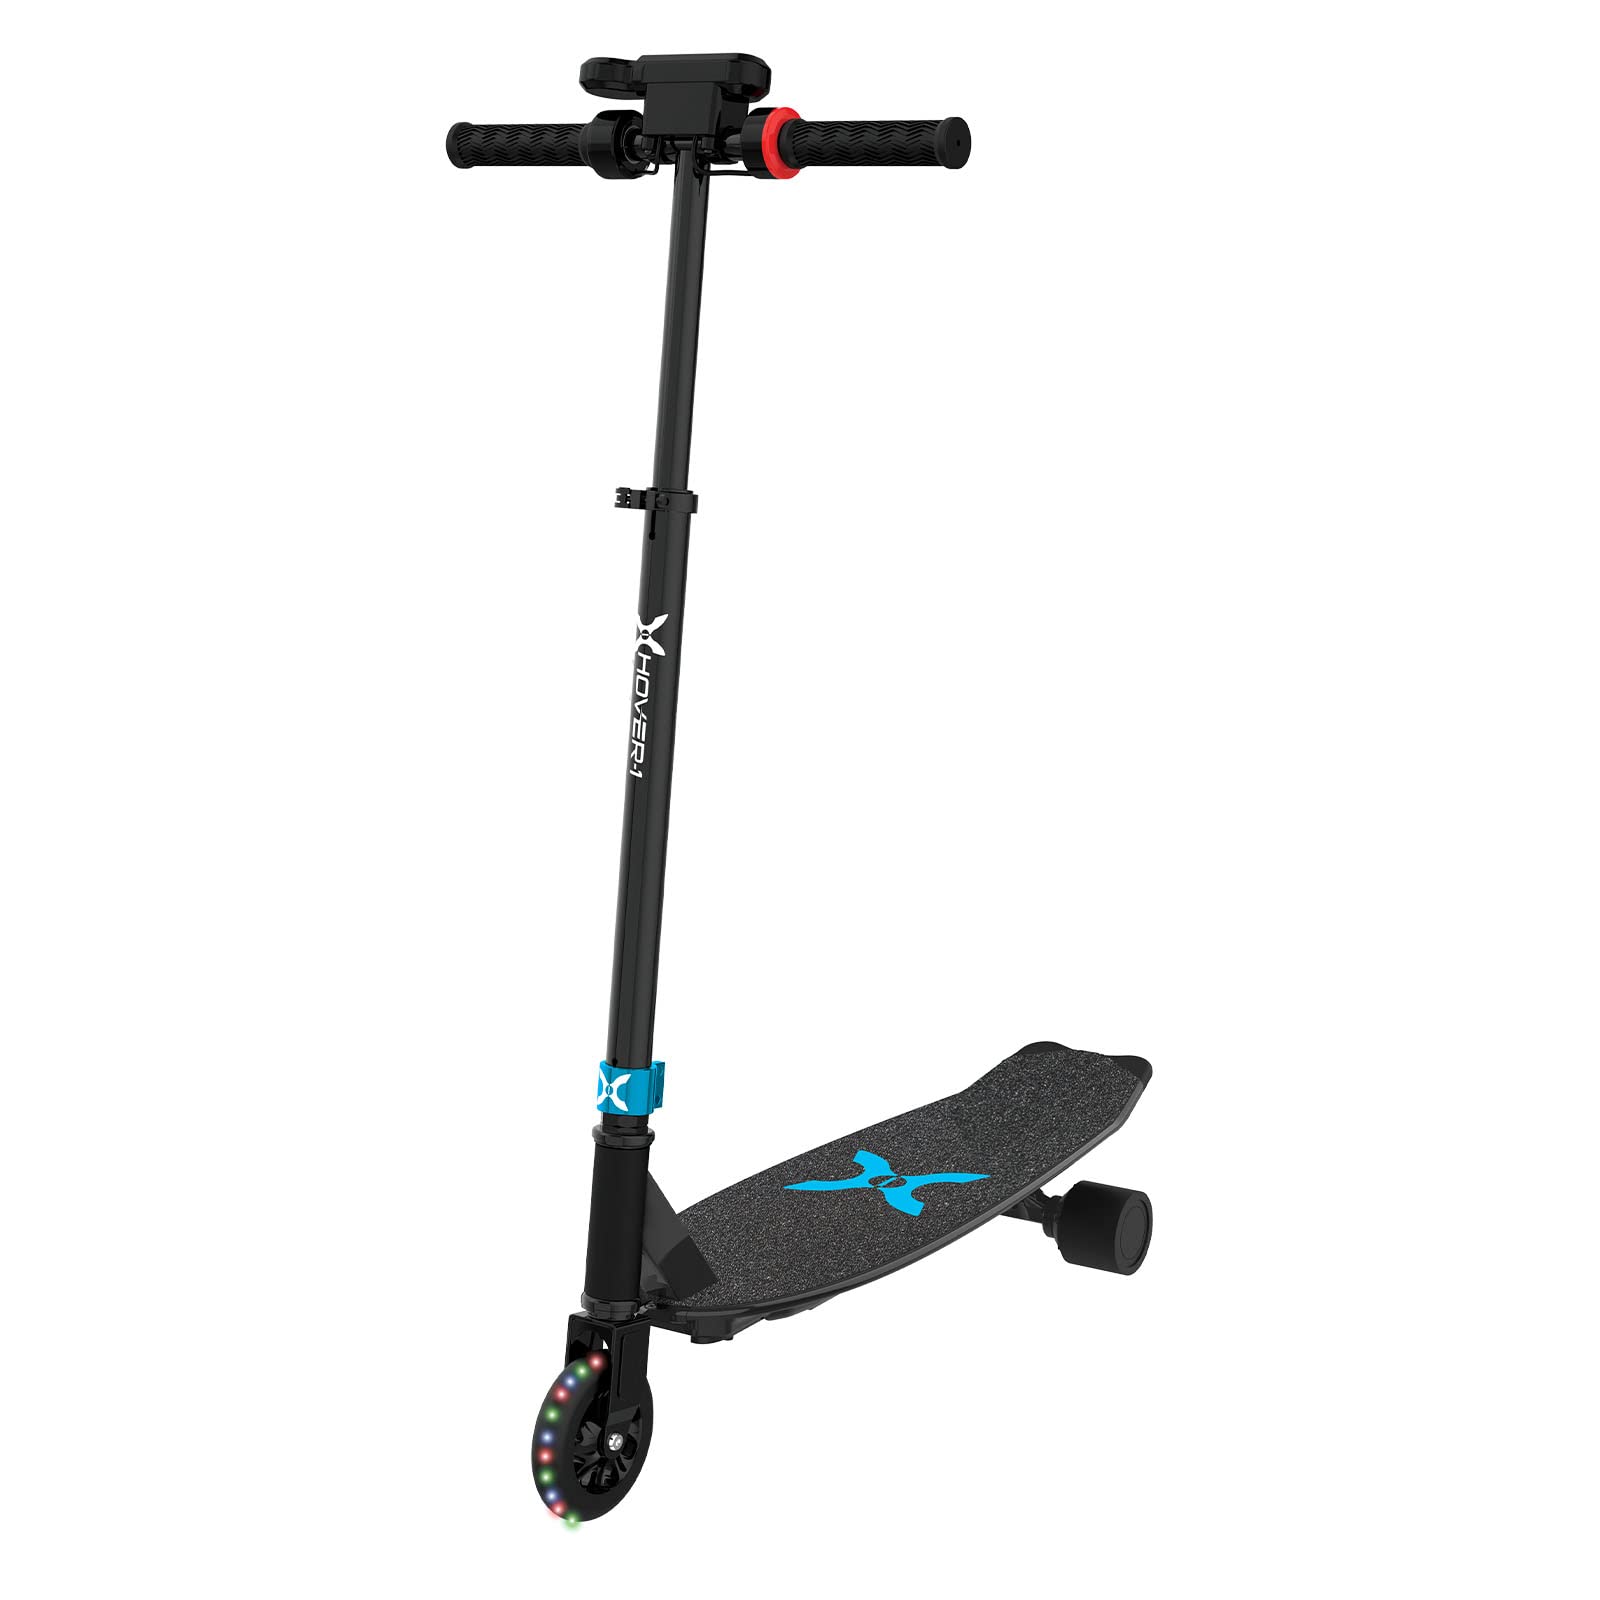 Hover-1 Switch 2-In-1 Remote Controlled Electric Scooter & Skateboard (Black) $83.50 + Free Shipping